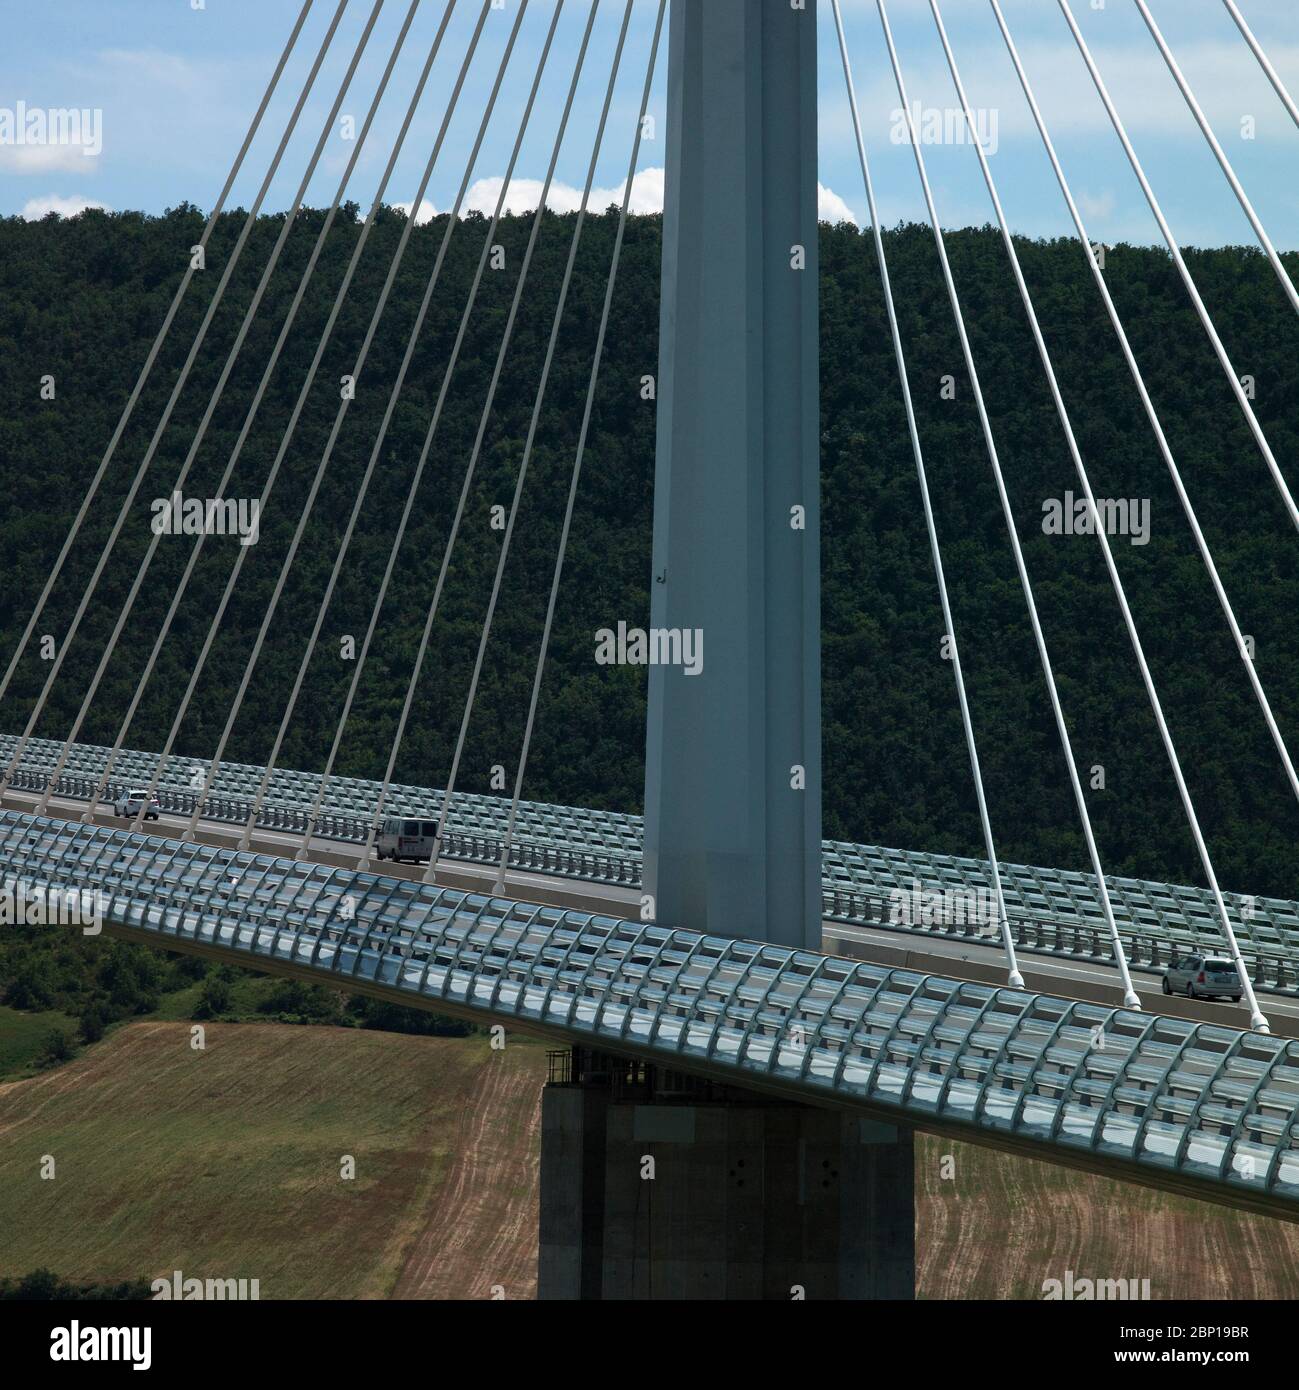 List 96+ Images as of 2020, which is the tallest viaduct bridge in the world? Superb